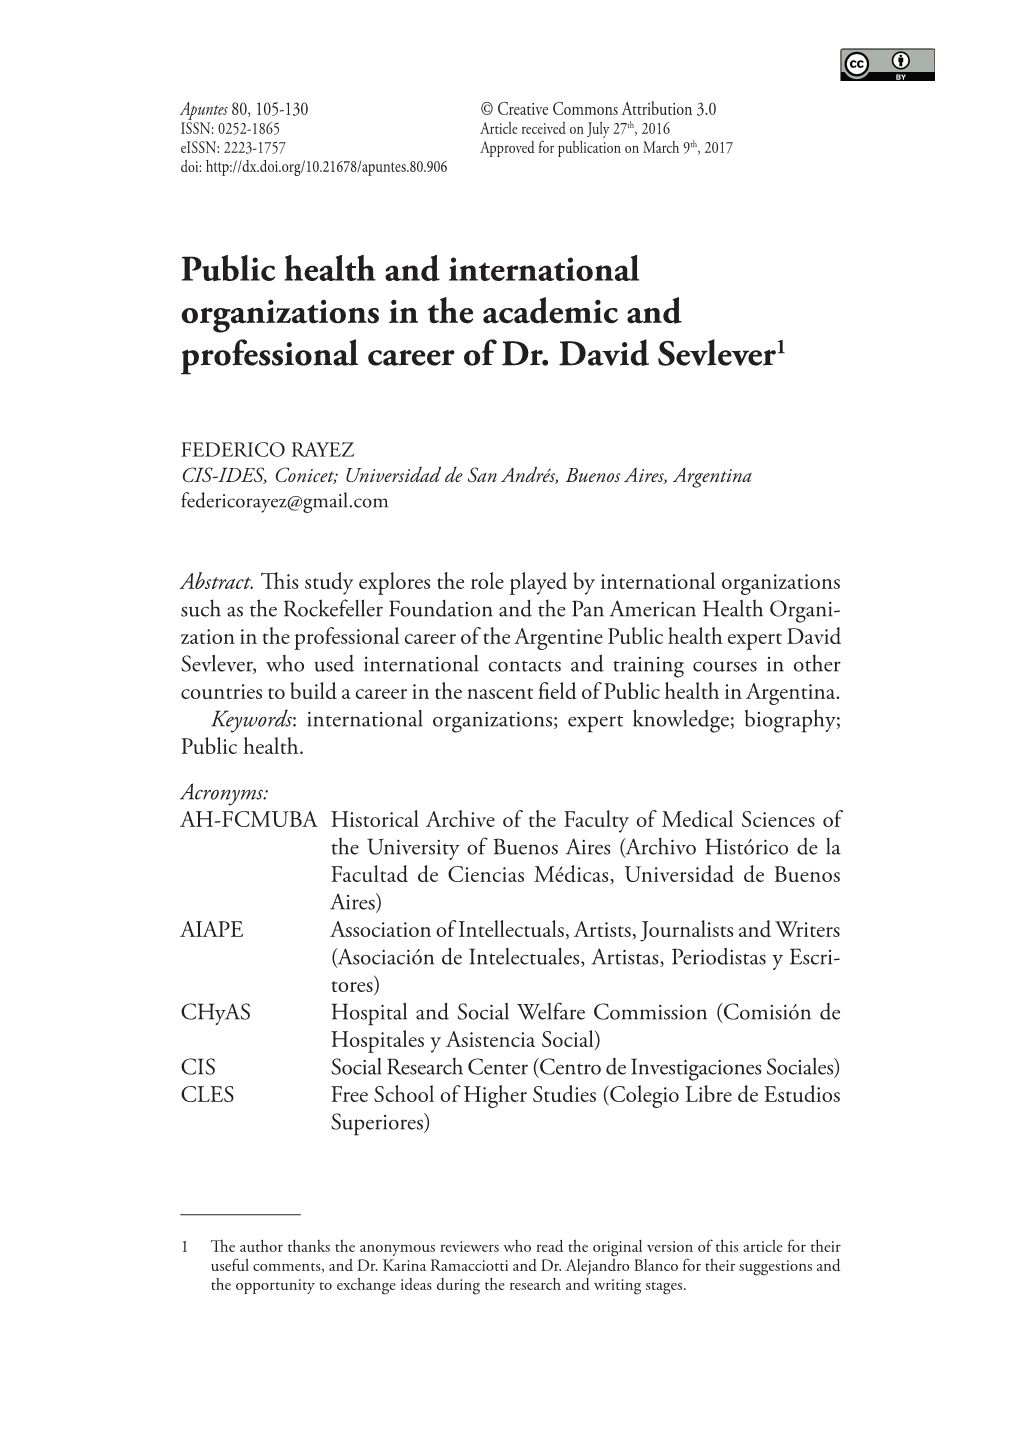 Public Health and International Organizations in the Academic and Professional Career of Dr